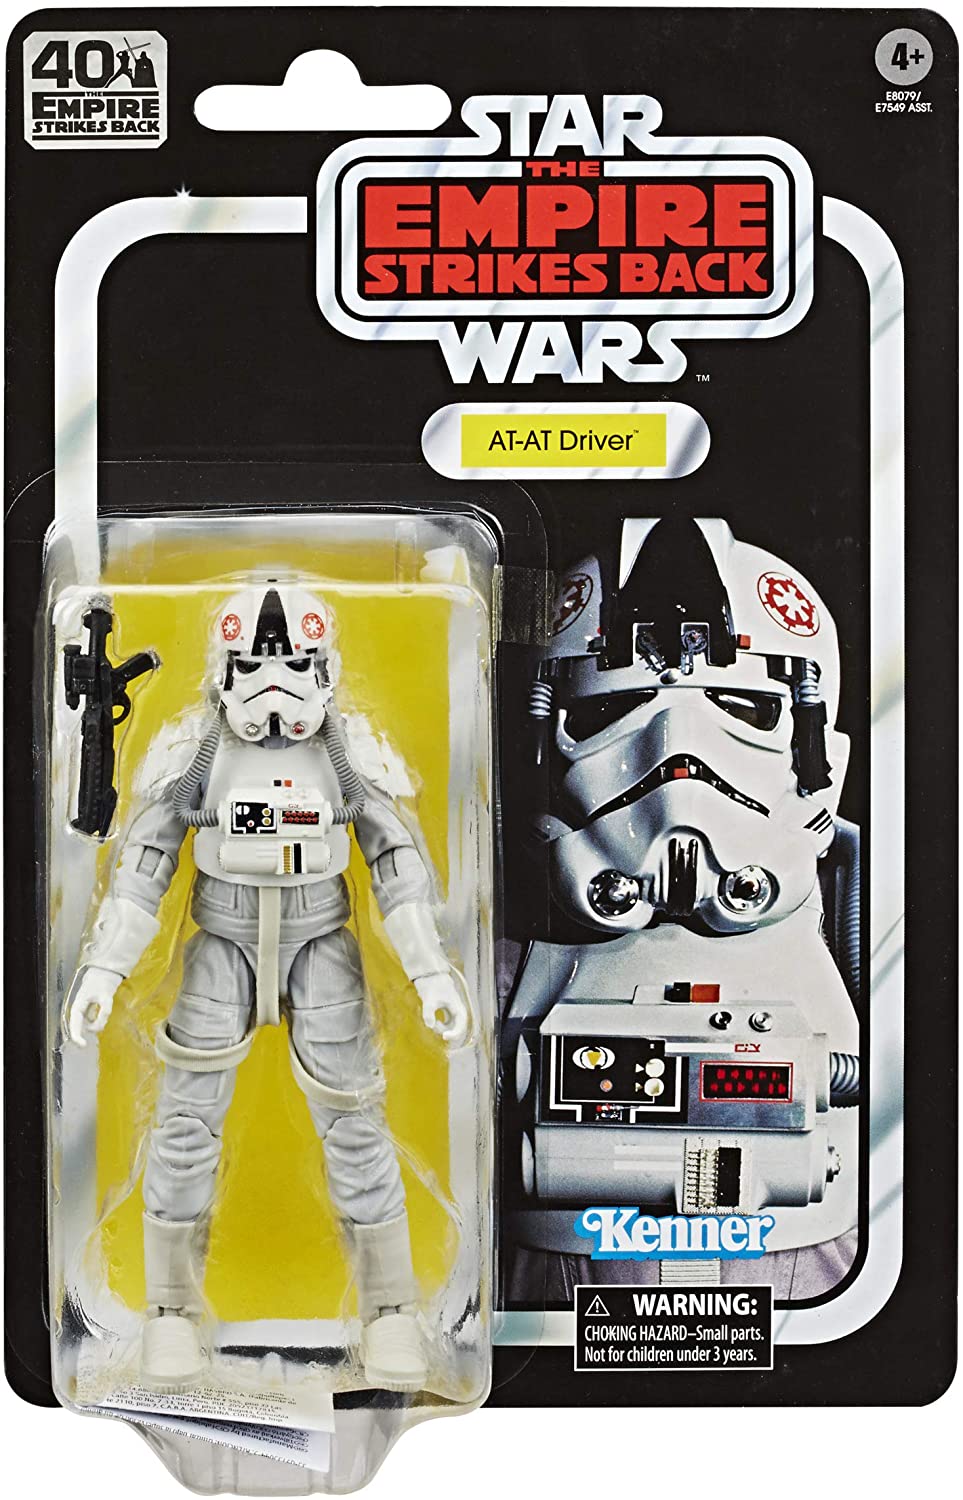 Star Wars The Black Series AT-AT Driver 15-cm-Scale The Empire Strikes Back 40th Anniversary Collectible Figure, Ages 4 and Up